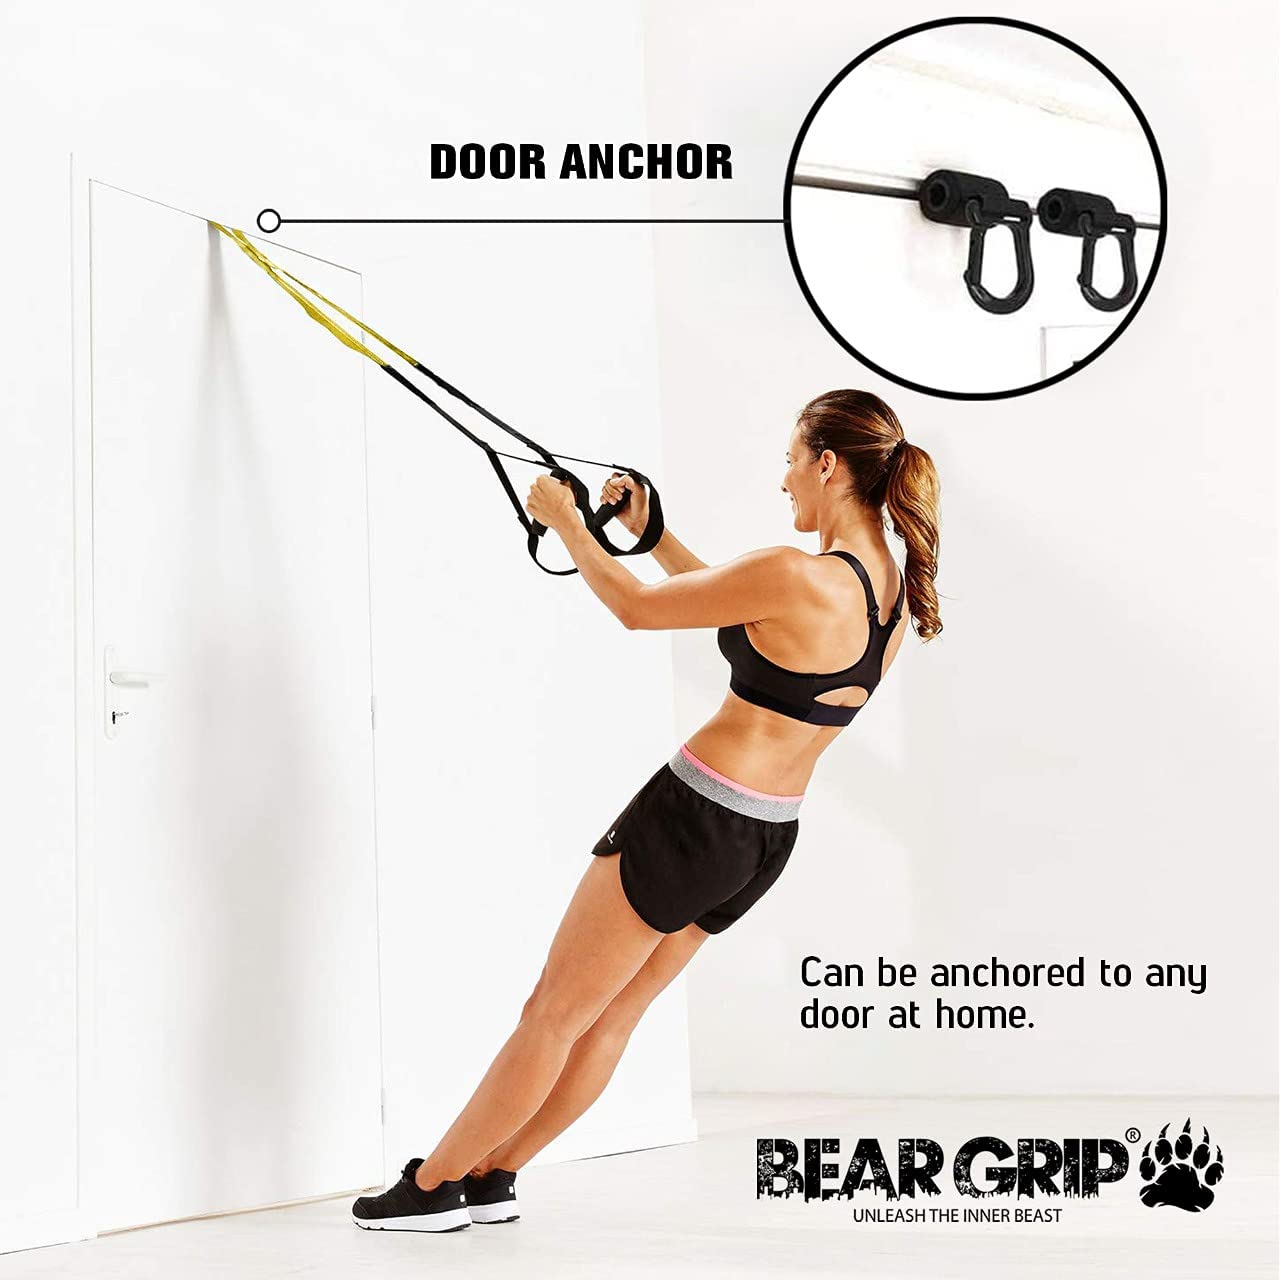 BEAR GRIP SURPLUS - Exercise Suspension, Indoor and Outdoor workouts